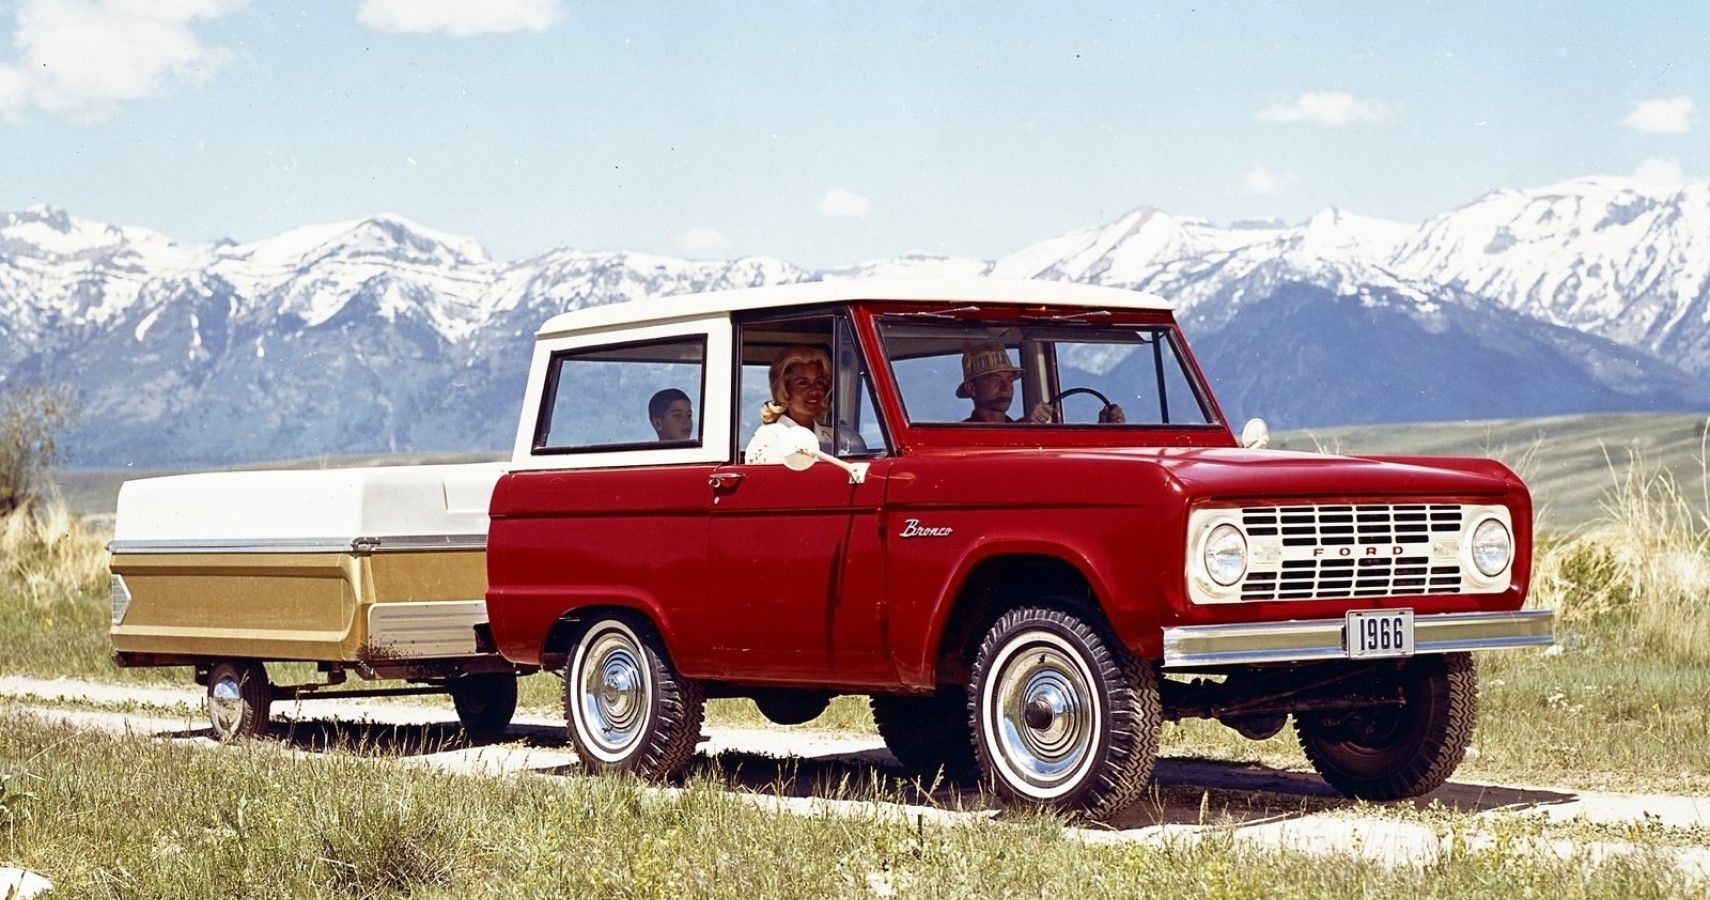 Top 8 How Much Does An Old Ford Bronco Cost 2022